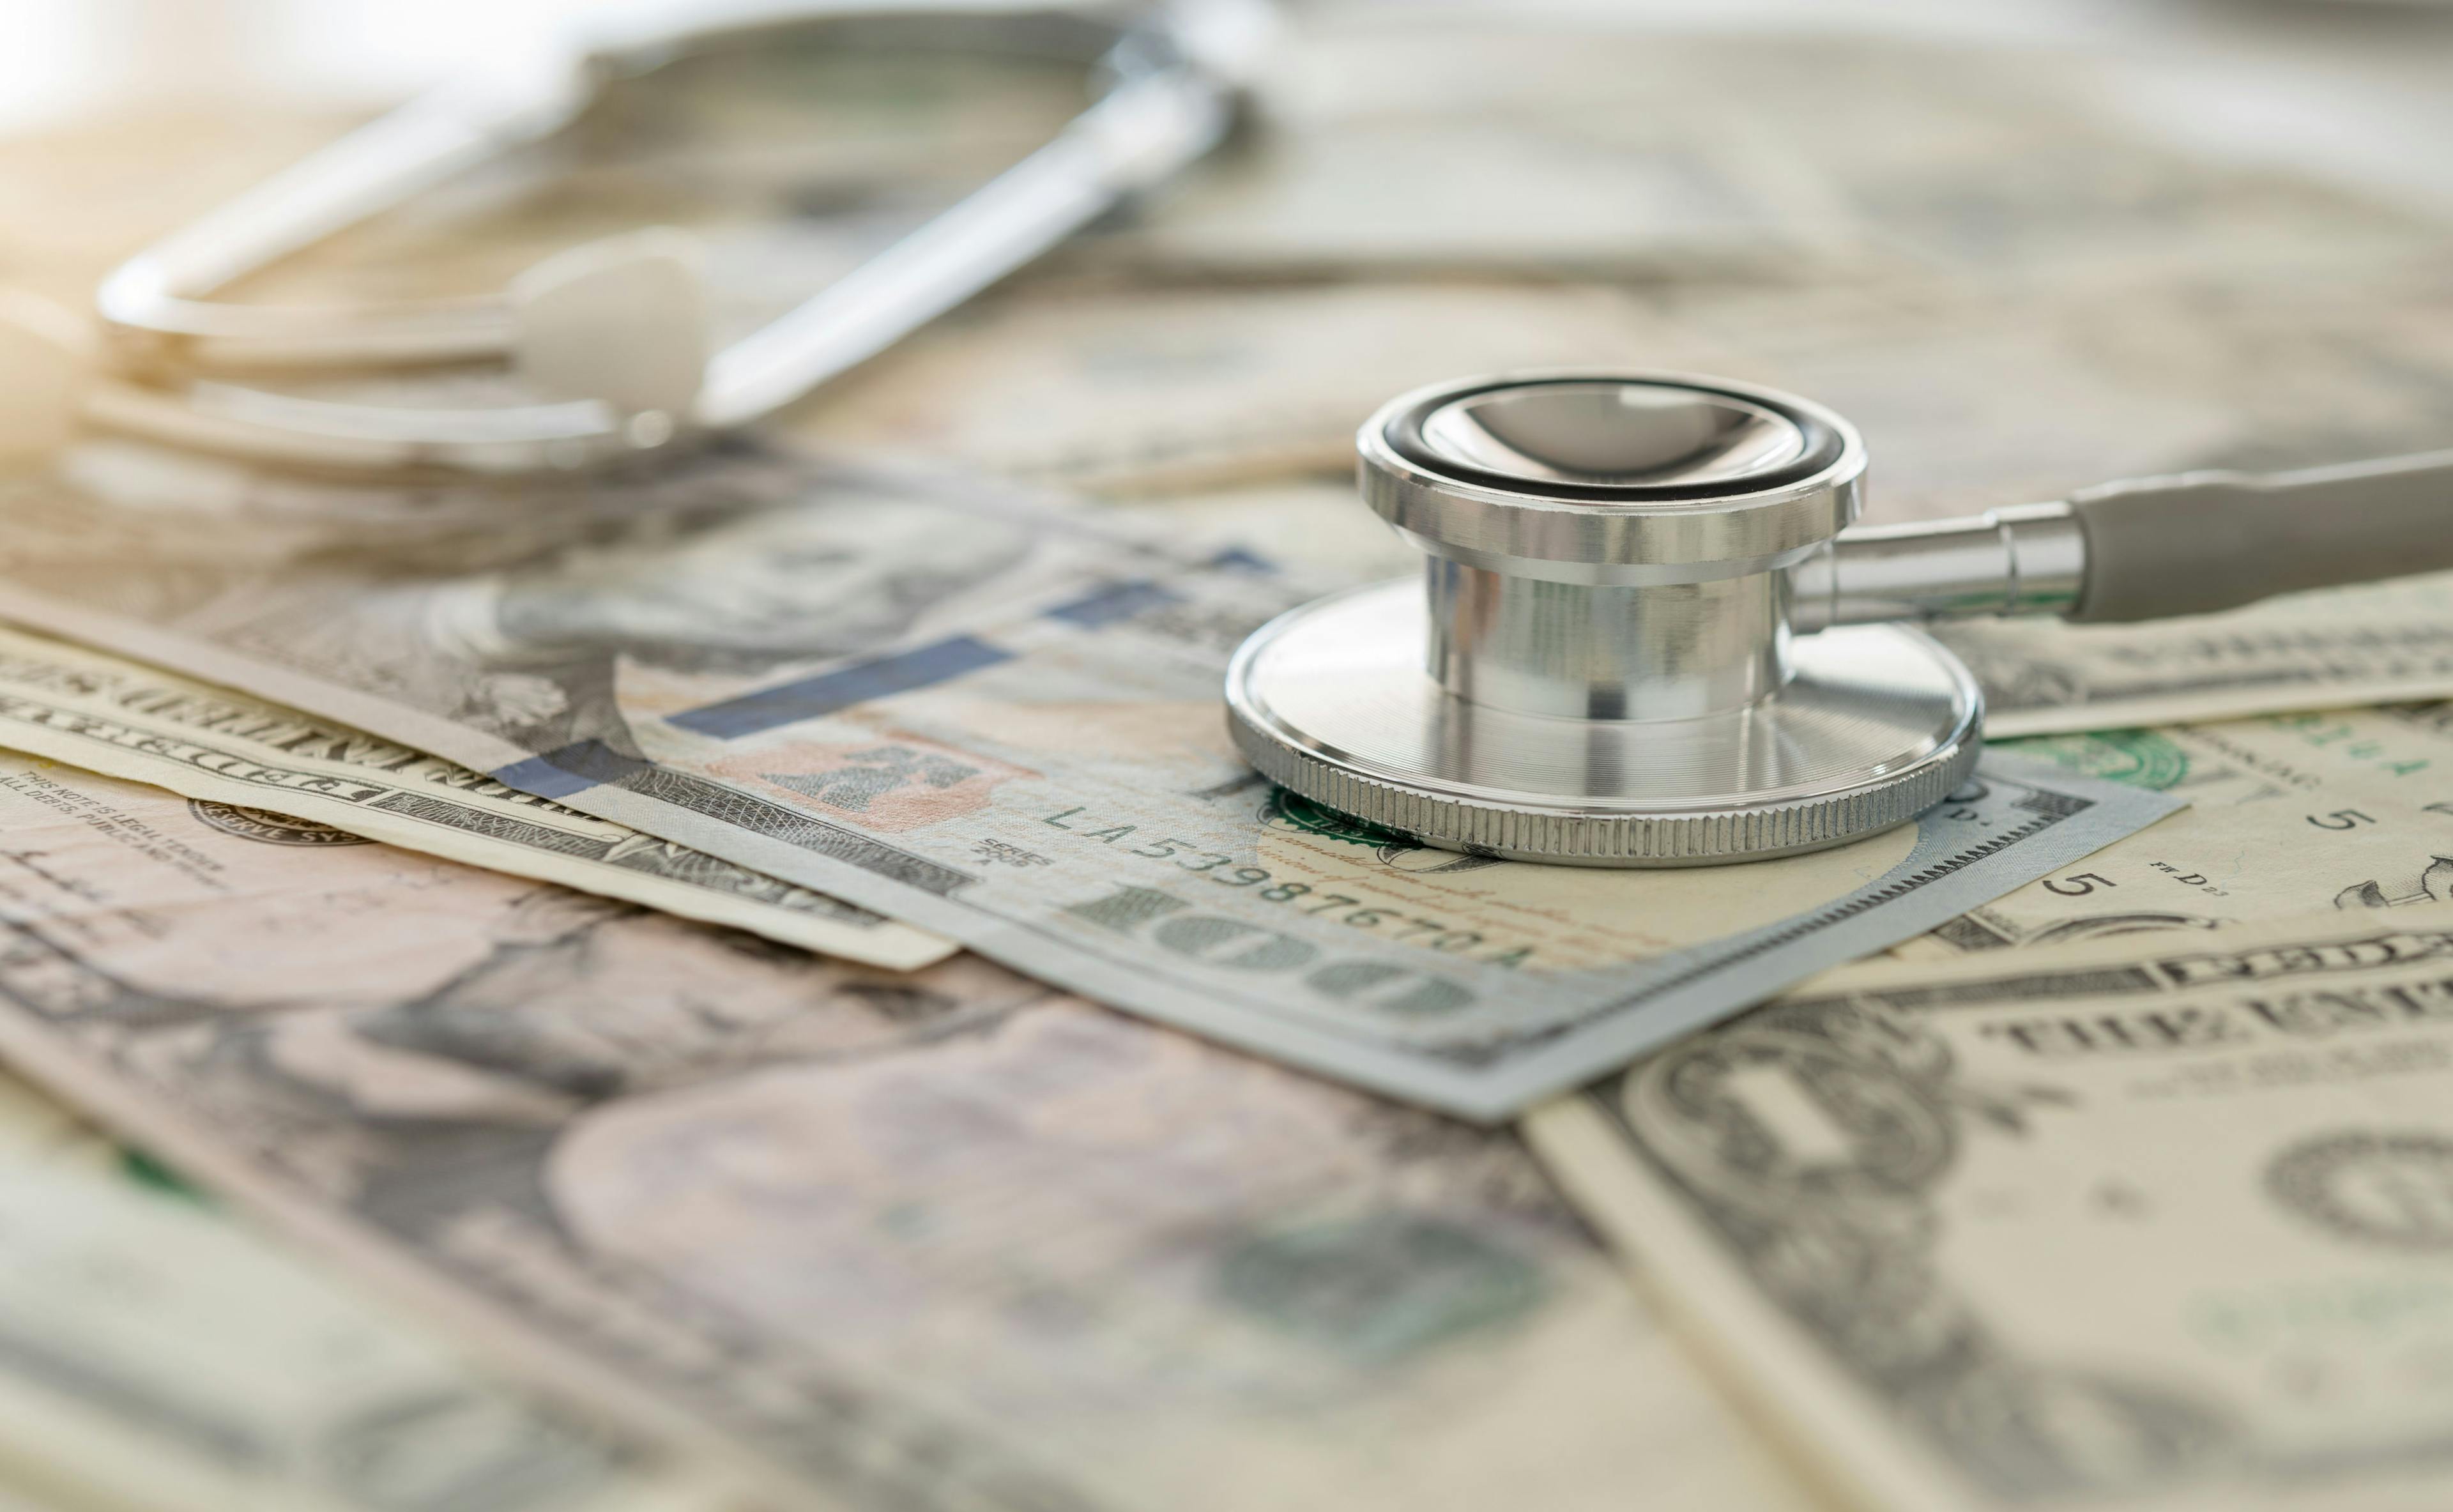 Health care costs per person vary across 50 states, Washington